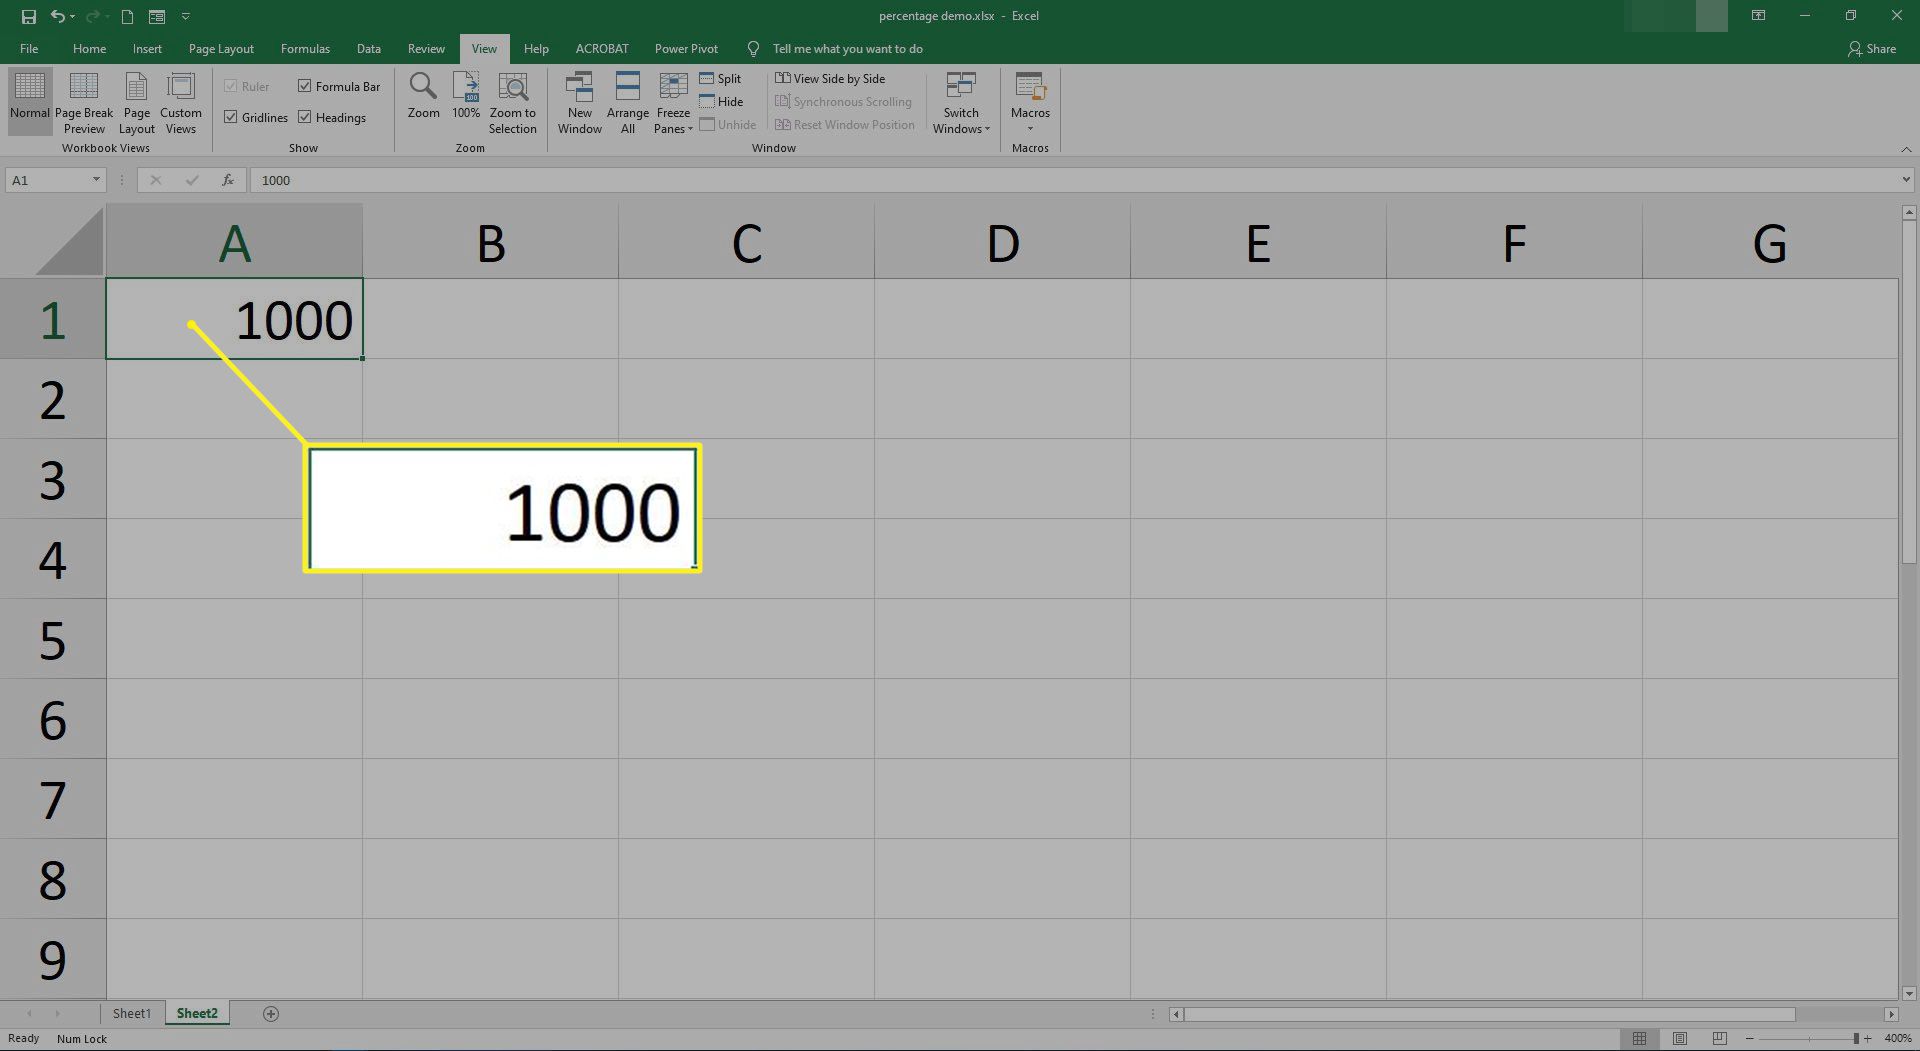 Siffran 1000 i cell A1 i Excel